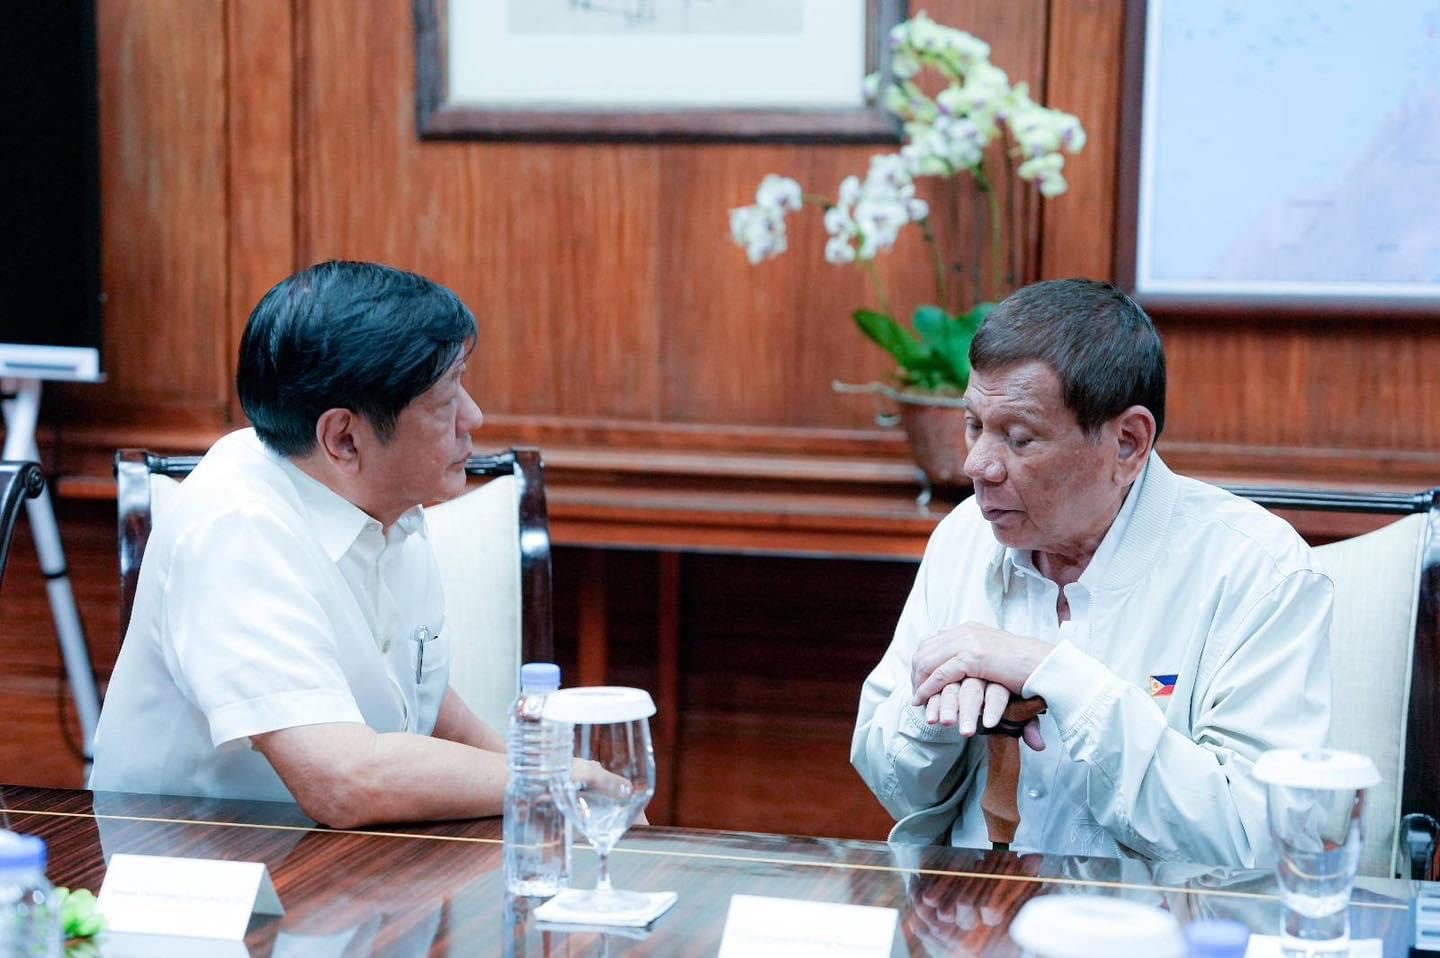 Duterte discusses Xi meeting, gives ‘good advice’ to Marcos in Palace visit